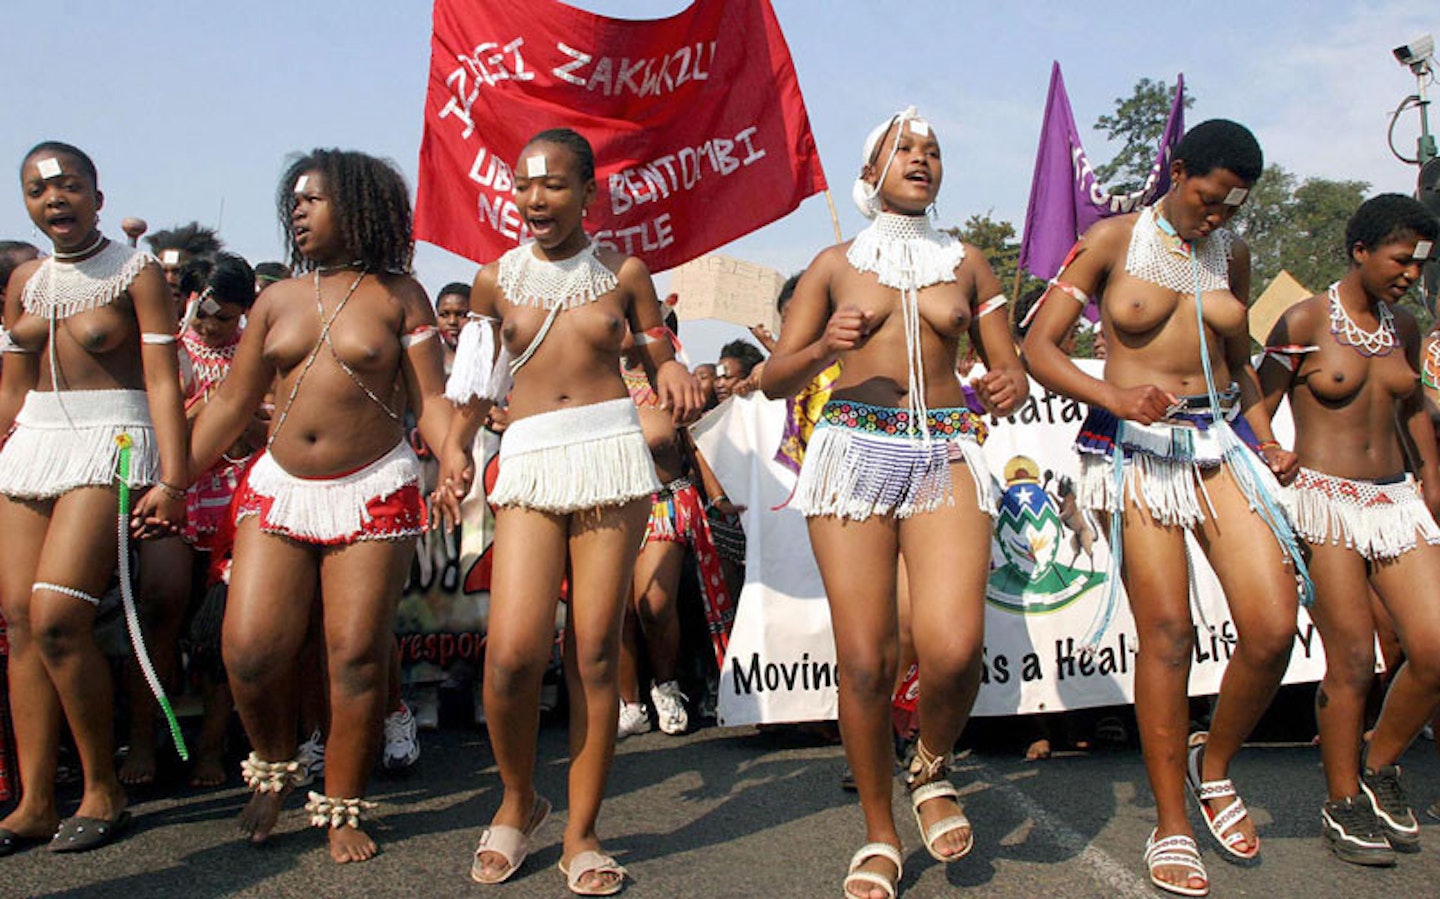 More than 300 virgins march in protest in the city of South Africa against the passing of the outlawing of virginity testing which is practised in some African traditional communities.The protesters called for the practice to continue as it and integral practice of their custom and tradition.